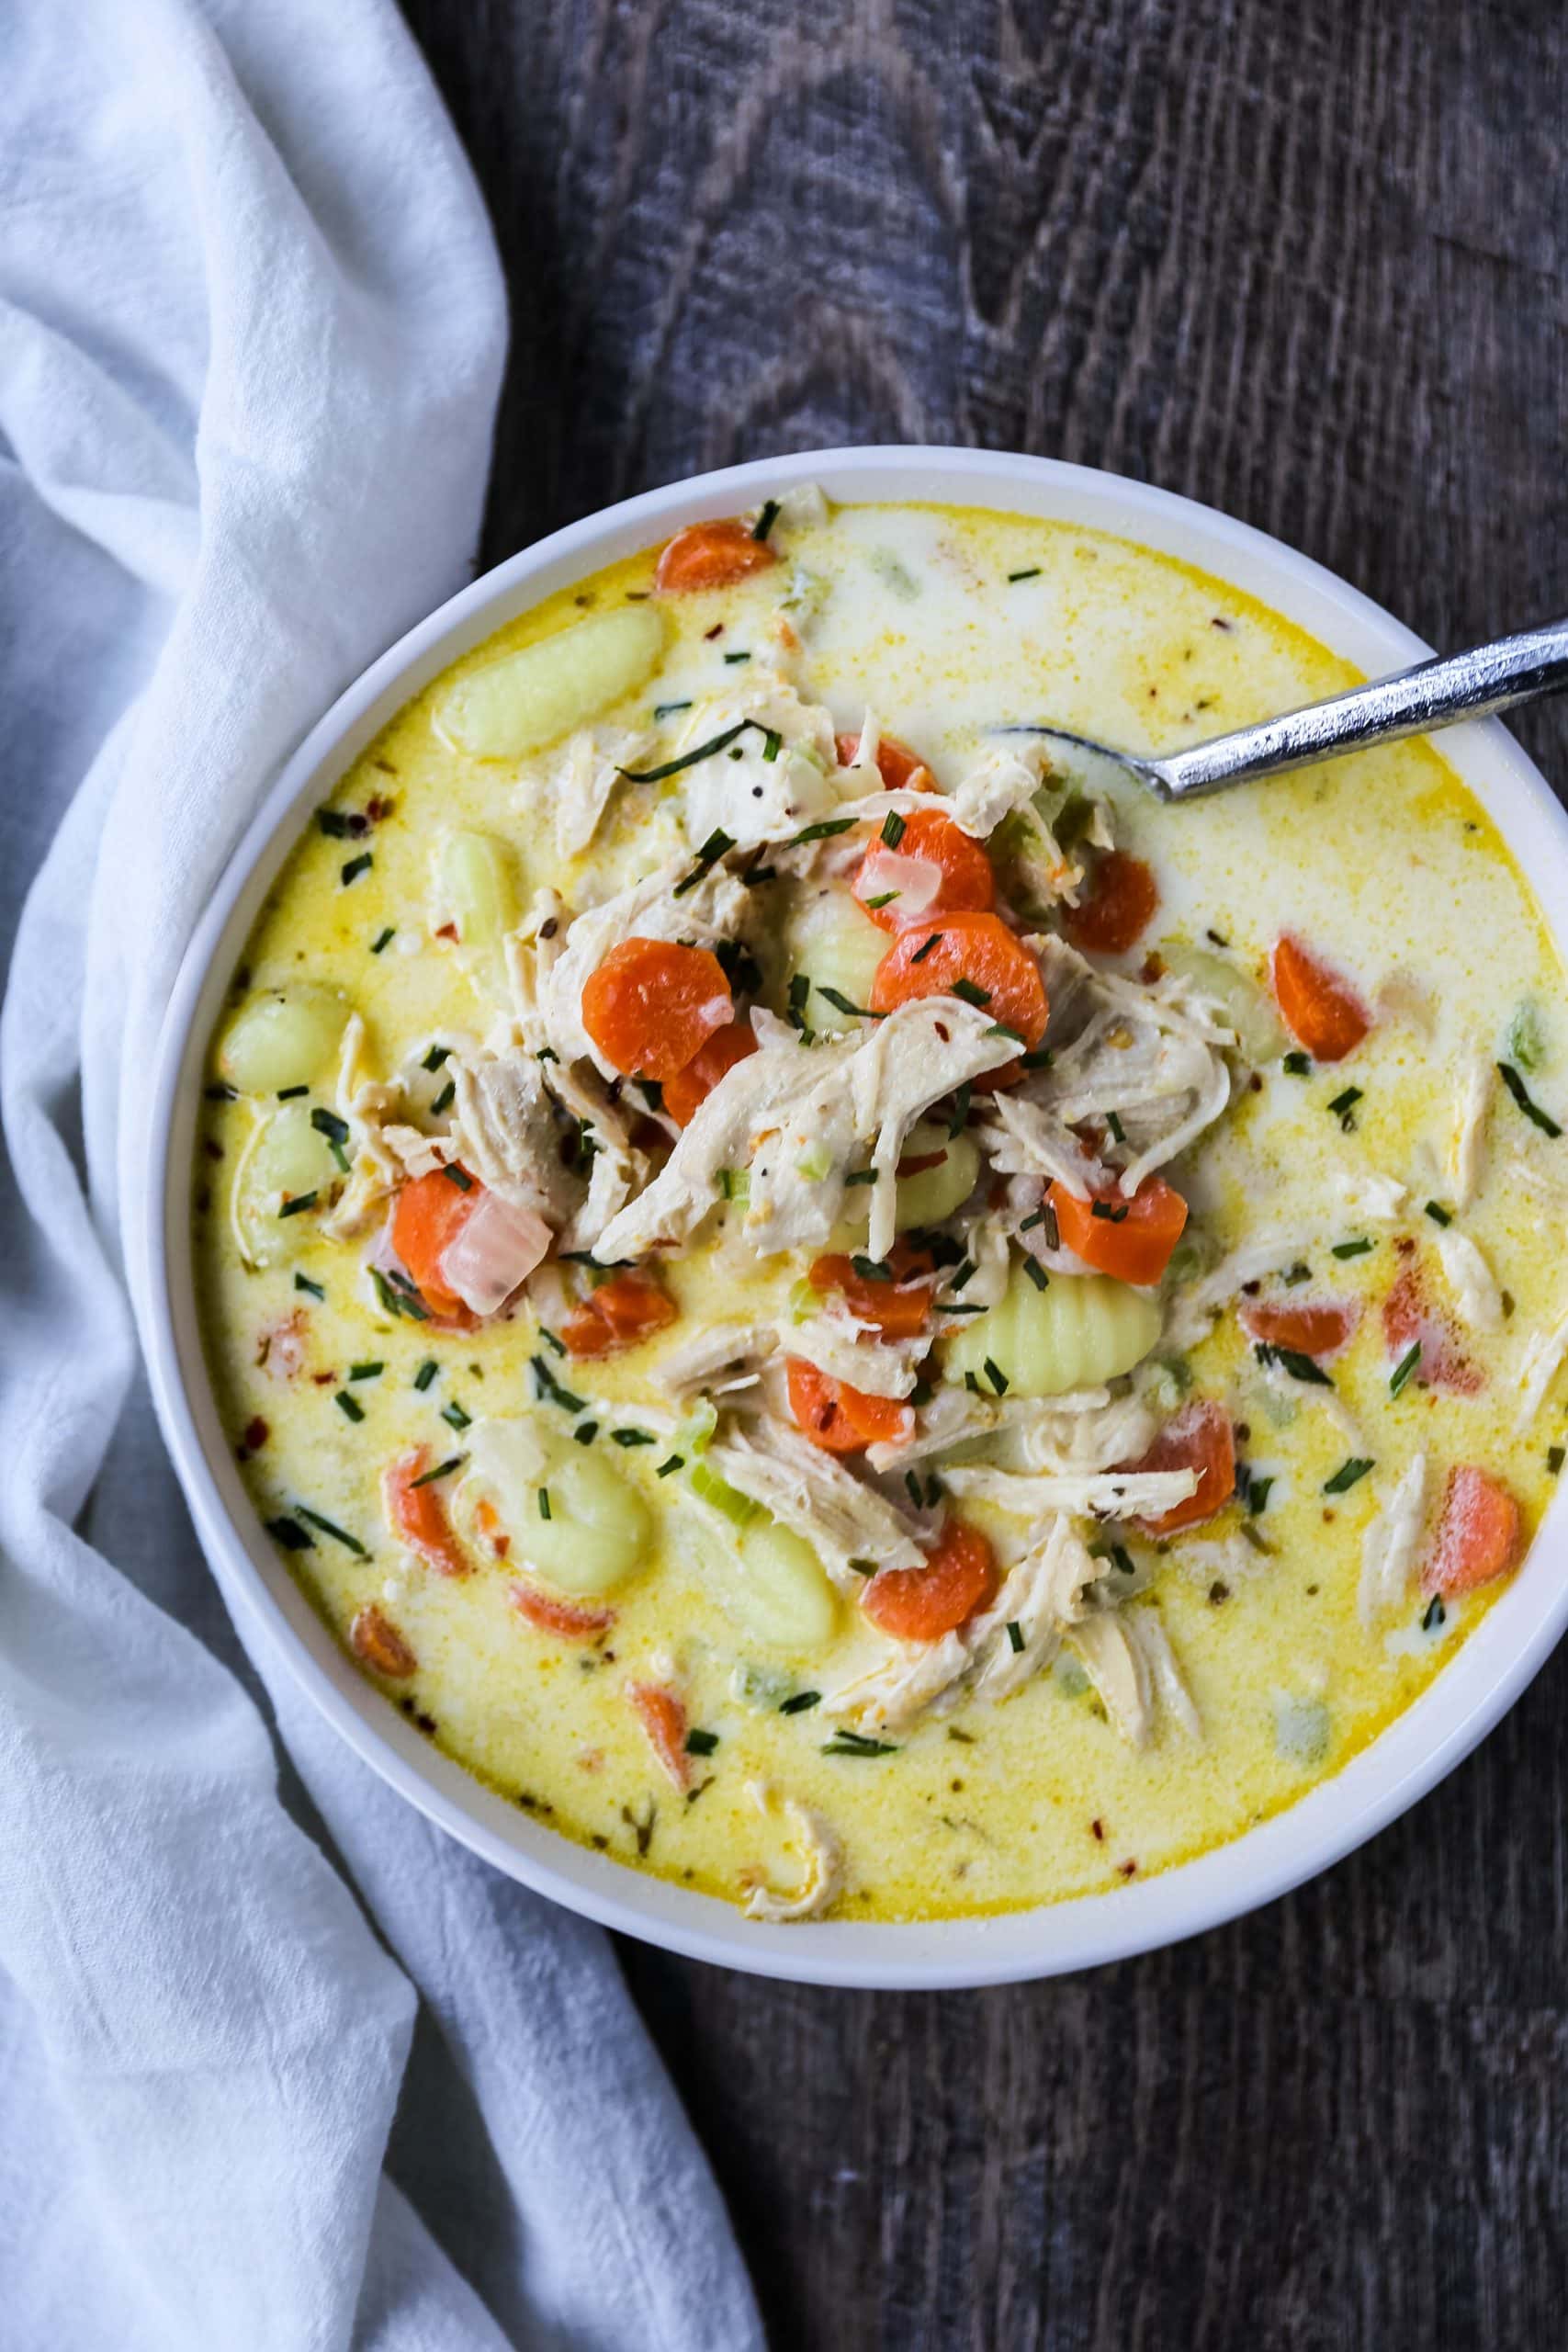 Creamy Gnocchi Chicken Soup Creamy chicken and vegetable soup with soft gnocchi pasta in a parmesan cheese creamy both. A warm, comforting bowl of comfort food! www.modernhoney.com #soup #soups #chickensoup